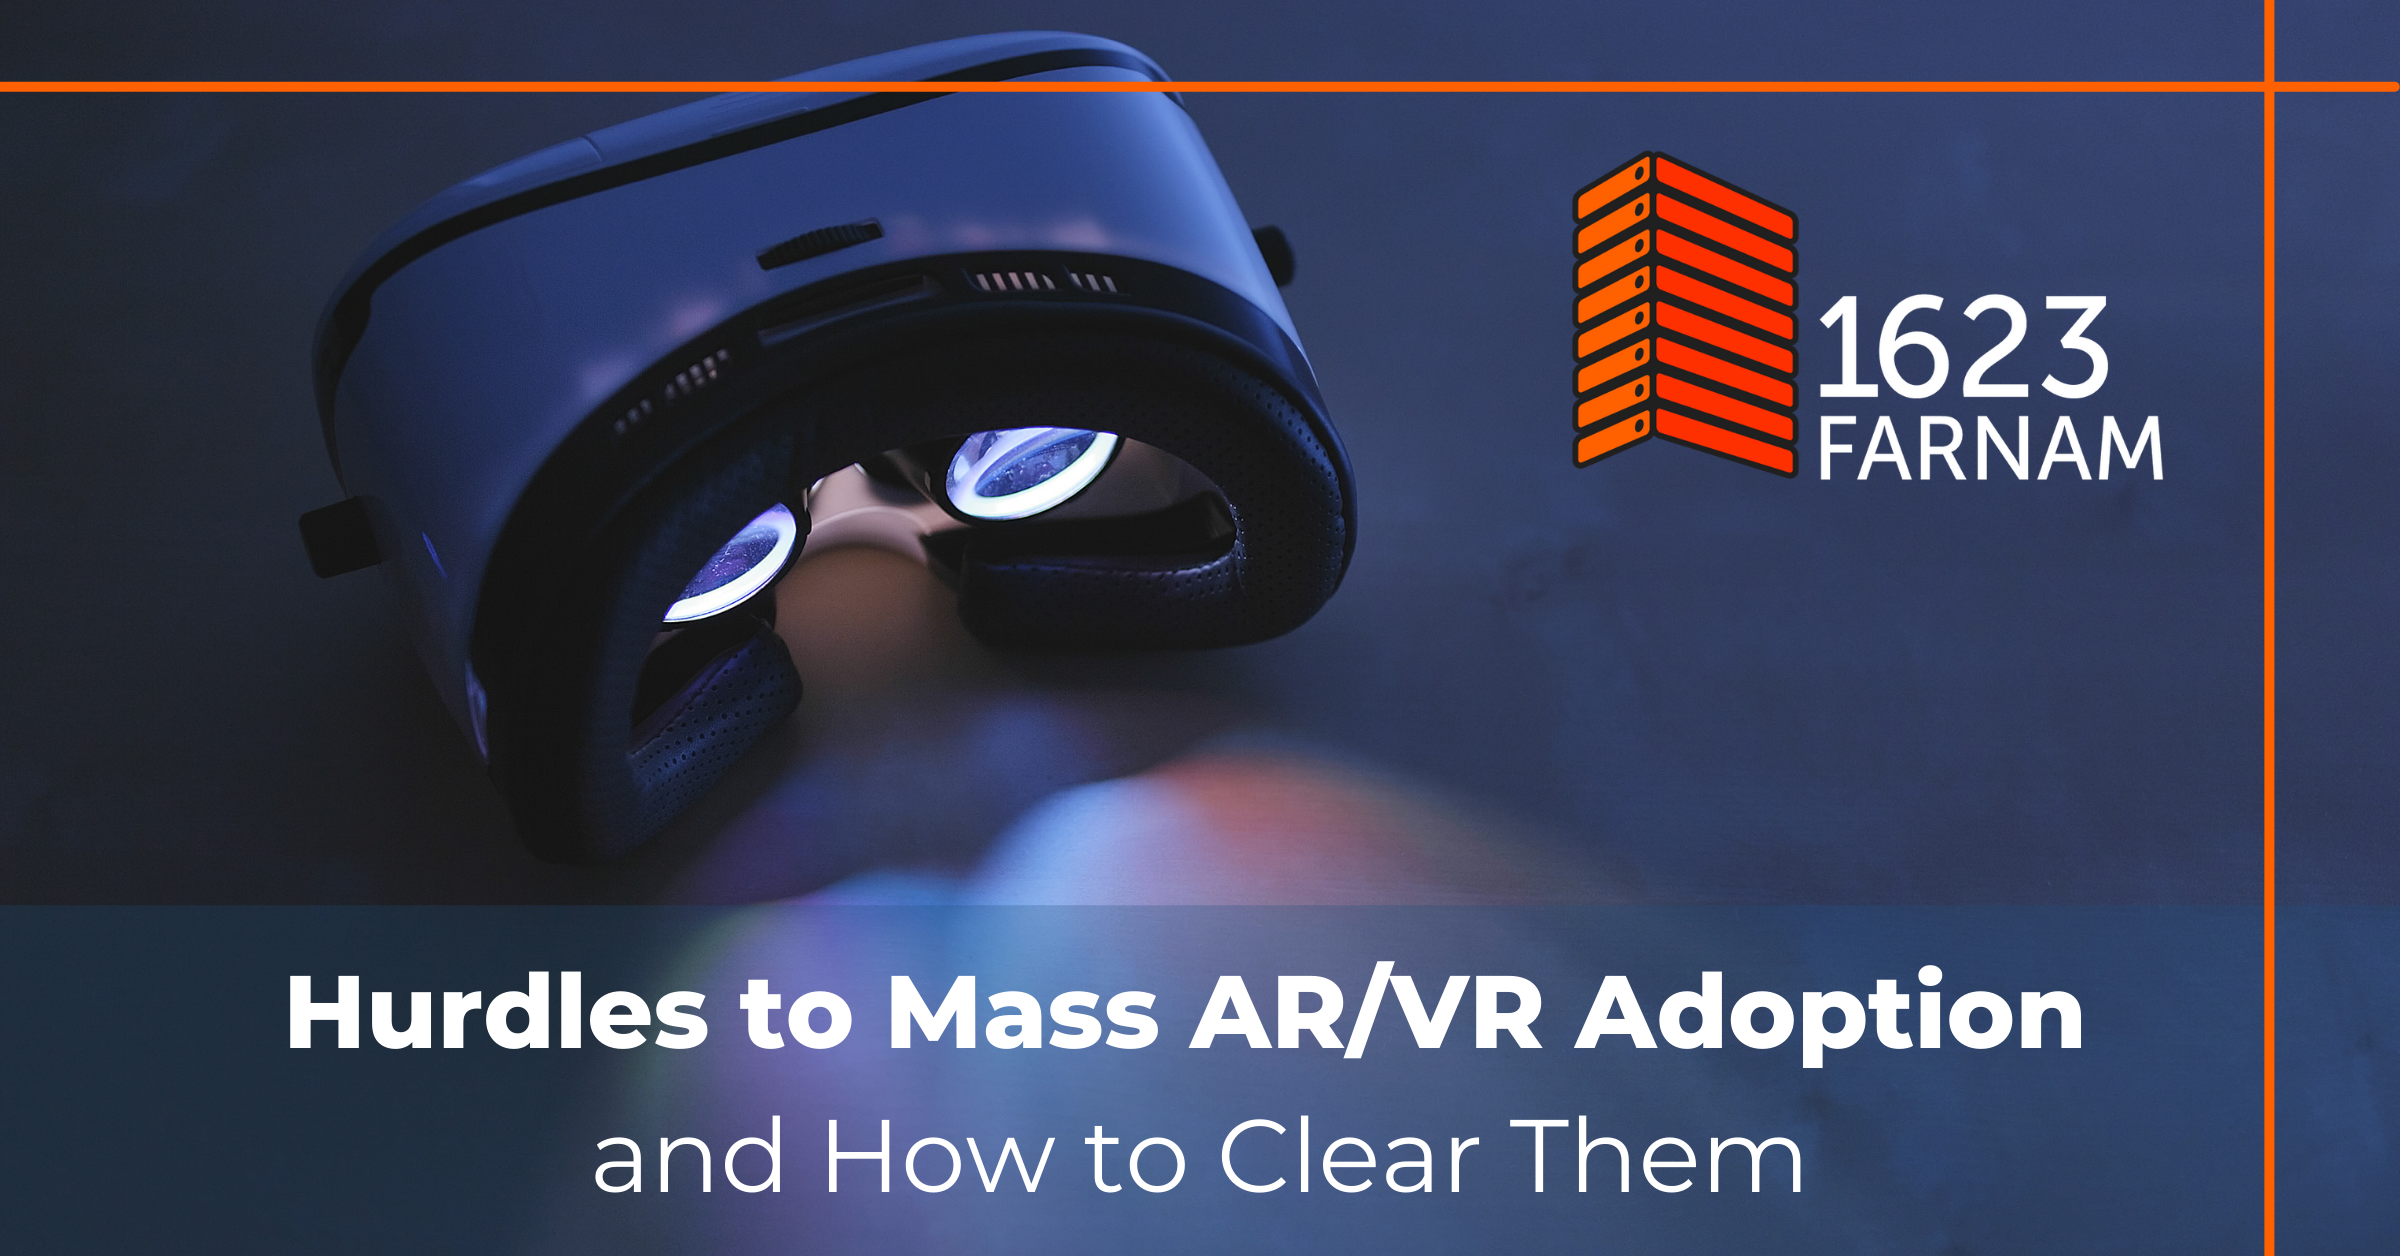 Hurdles to Mass AR/VR Adoption and How to Clear Them